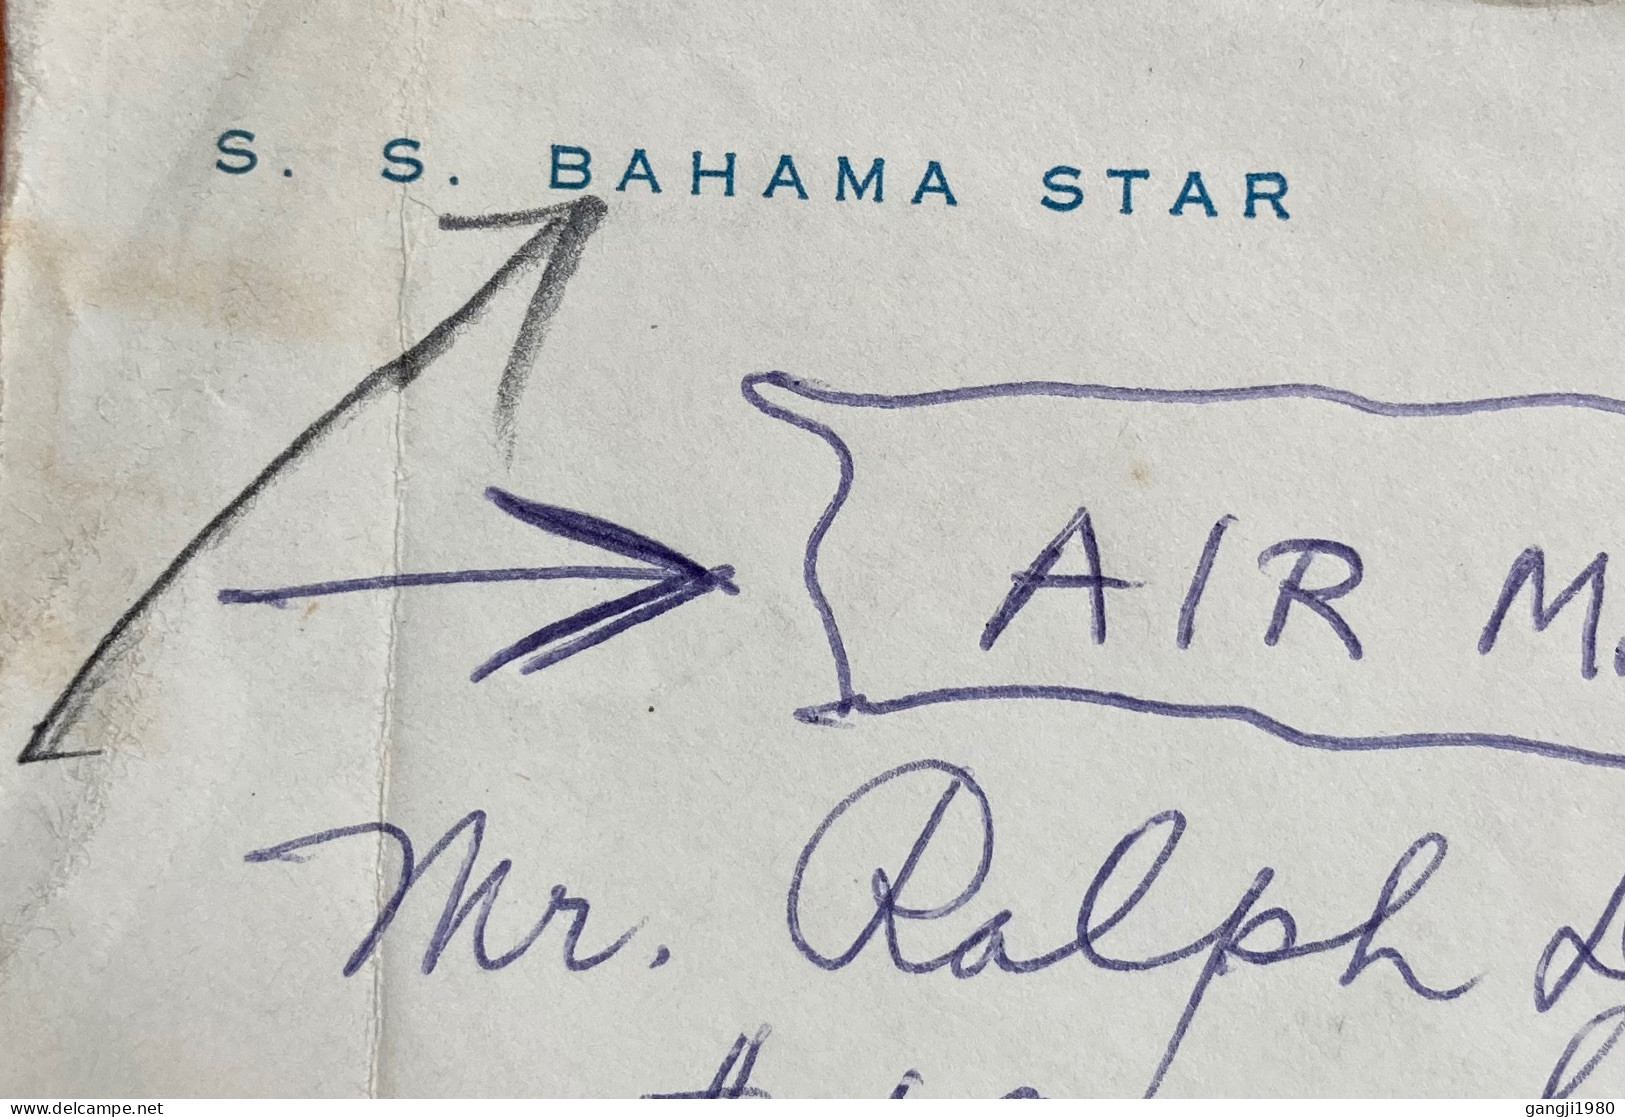 BAHAMAS 1964, SS. BAHAMA STAR. PRIVATE COVER USED TO USA, PARADISE BEACH & QUEEN STAMP, NASSAU CITY WAVY CANCEL - 1963-1973 Interne Autonomie